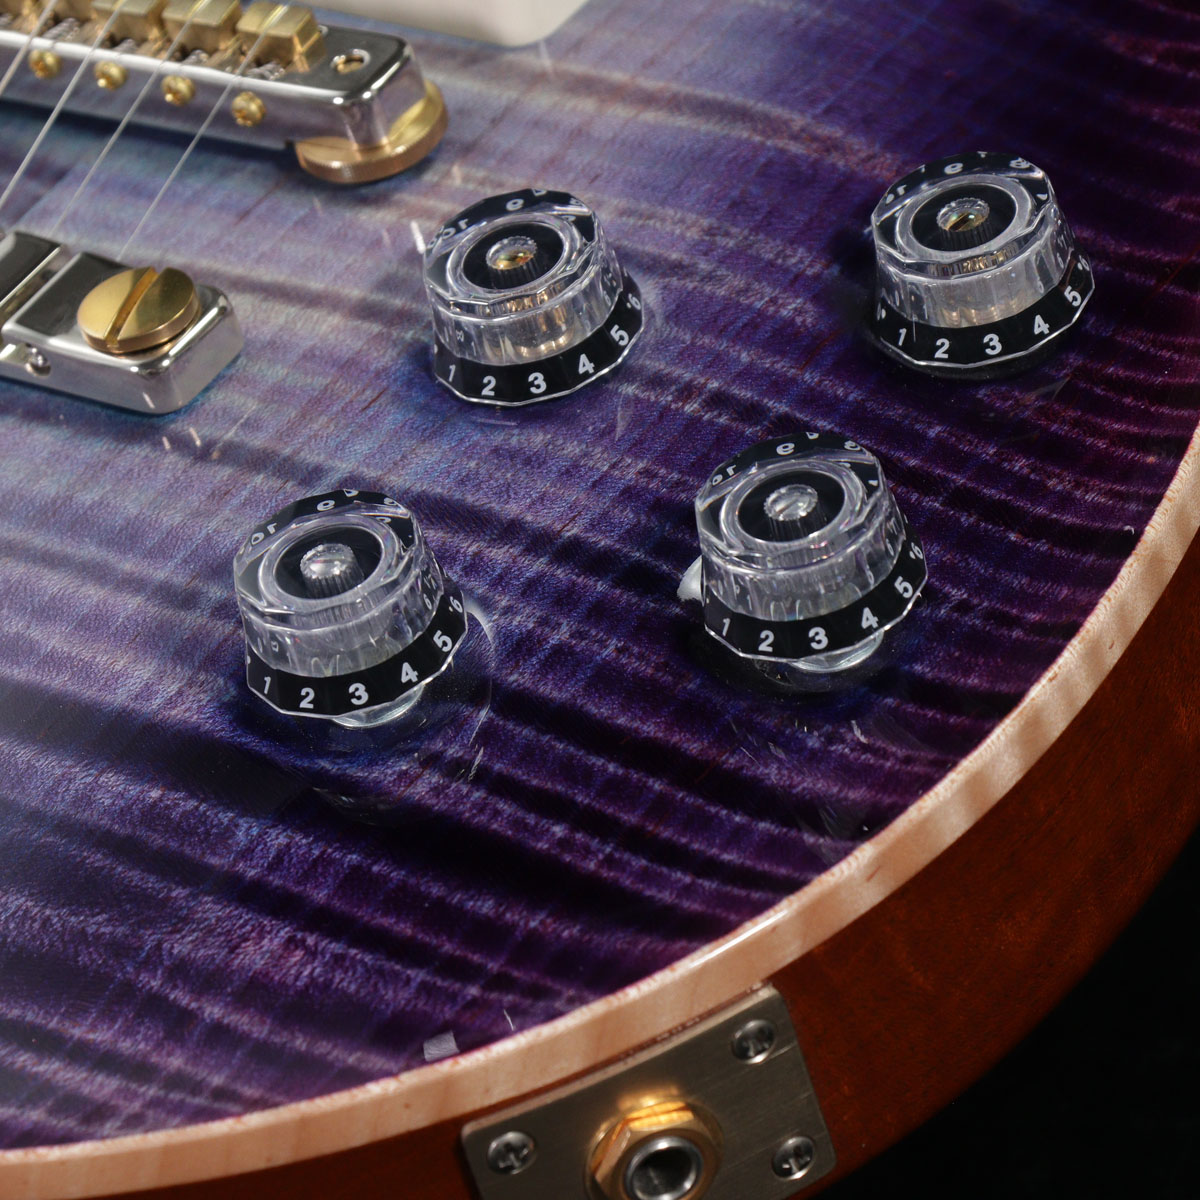 Paul Reed Smith (PRS) / Private Stock #8446 McCarty594 Aqua Violet